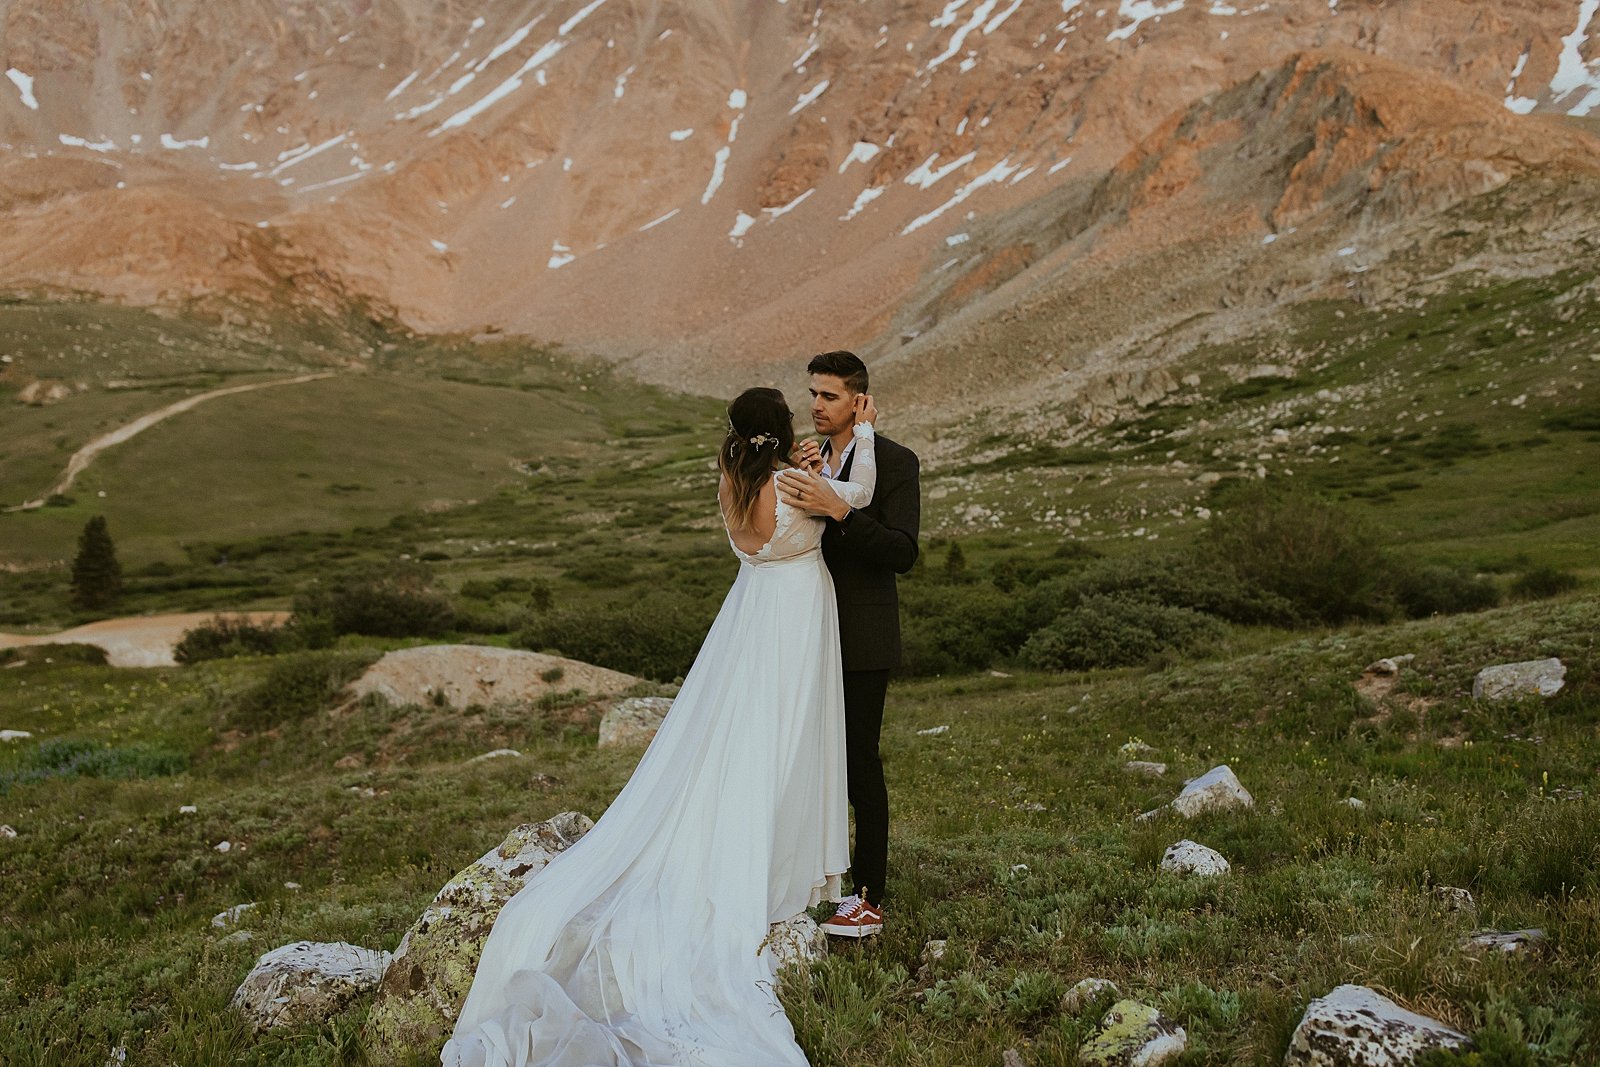 bride and groom in mountain scape, lake county colorado elopement, colorado adventure elopement, rocky mountain summer wildflowers, valley of wildflowers elopement, alpine glow sunset elopement